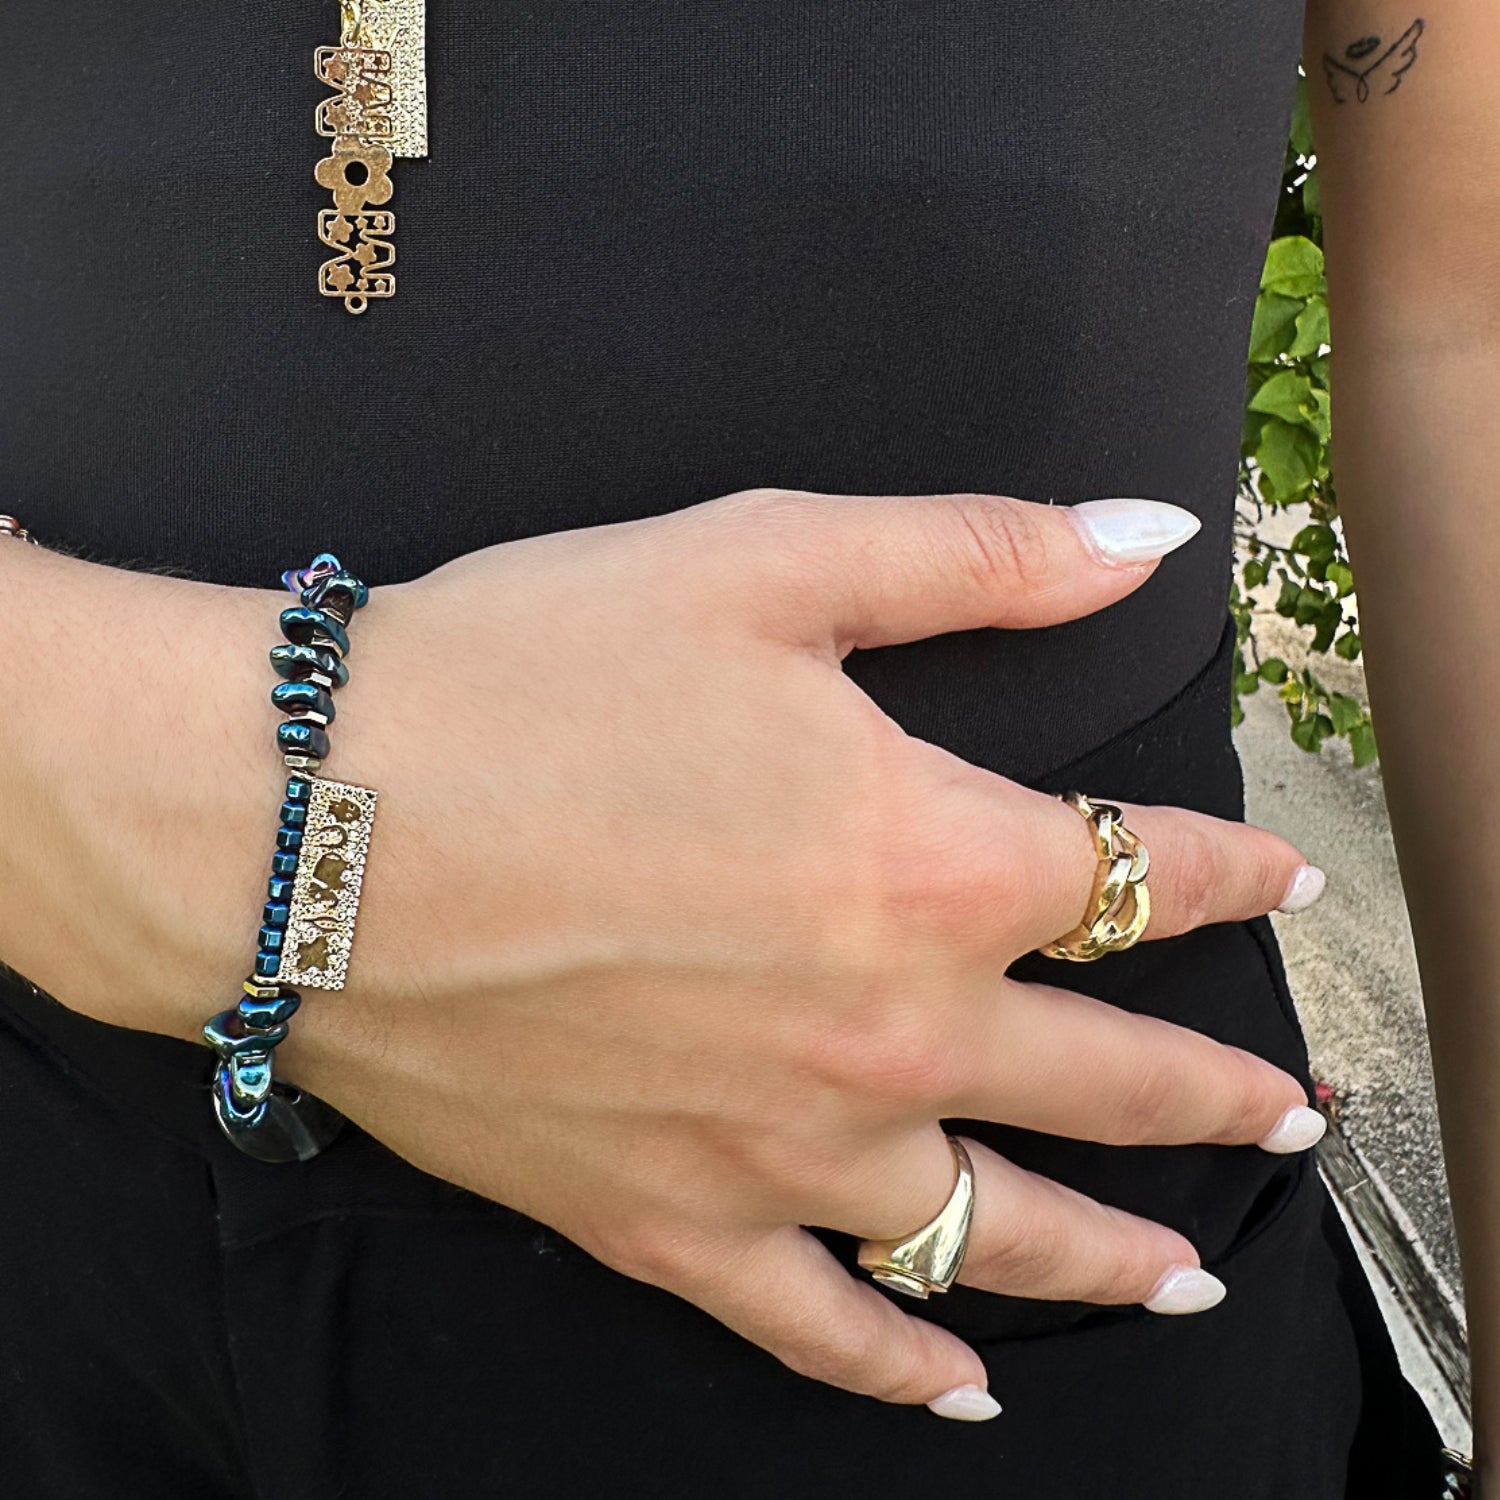 See how the Protection &amp; Luck Blue Hematite Bracelet adorns the hand model&#39;s wrist, combining style and spiritual significance.